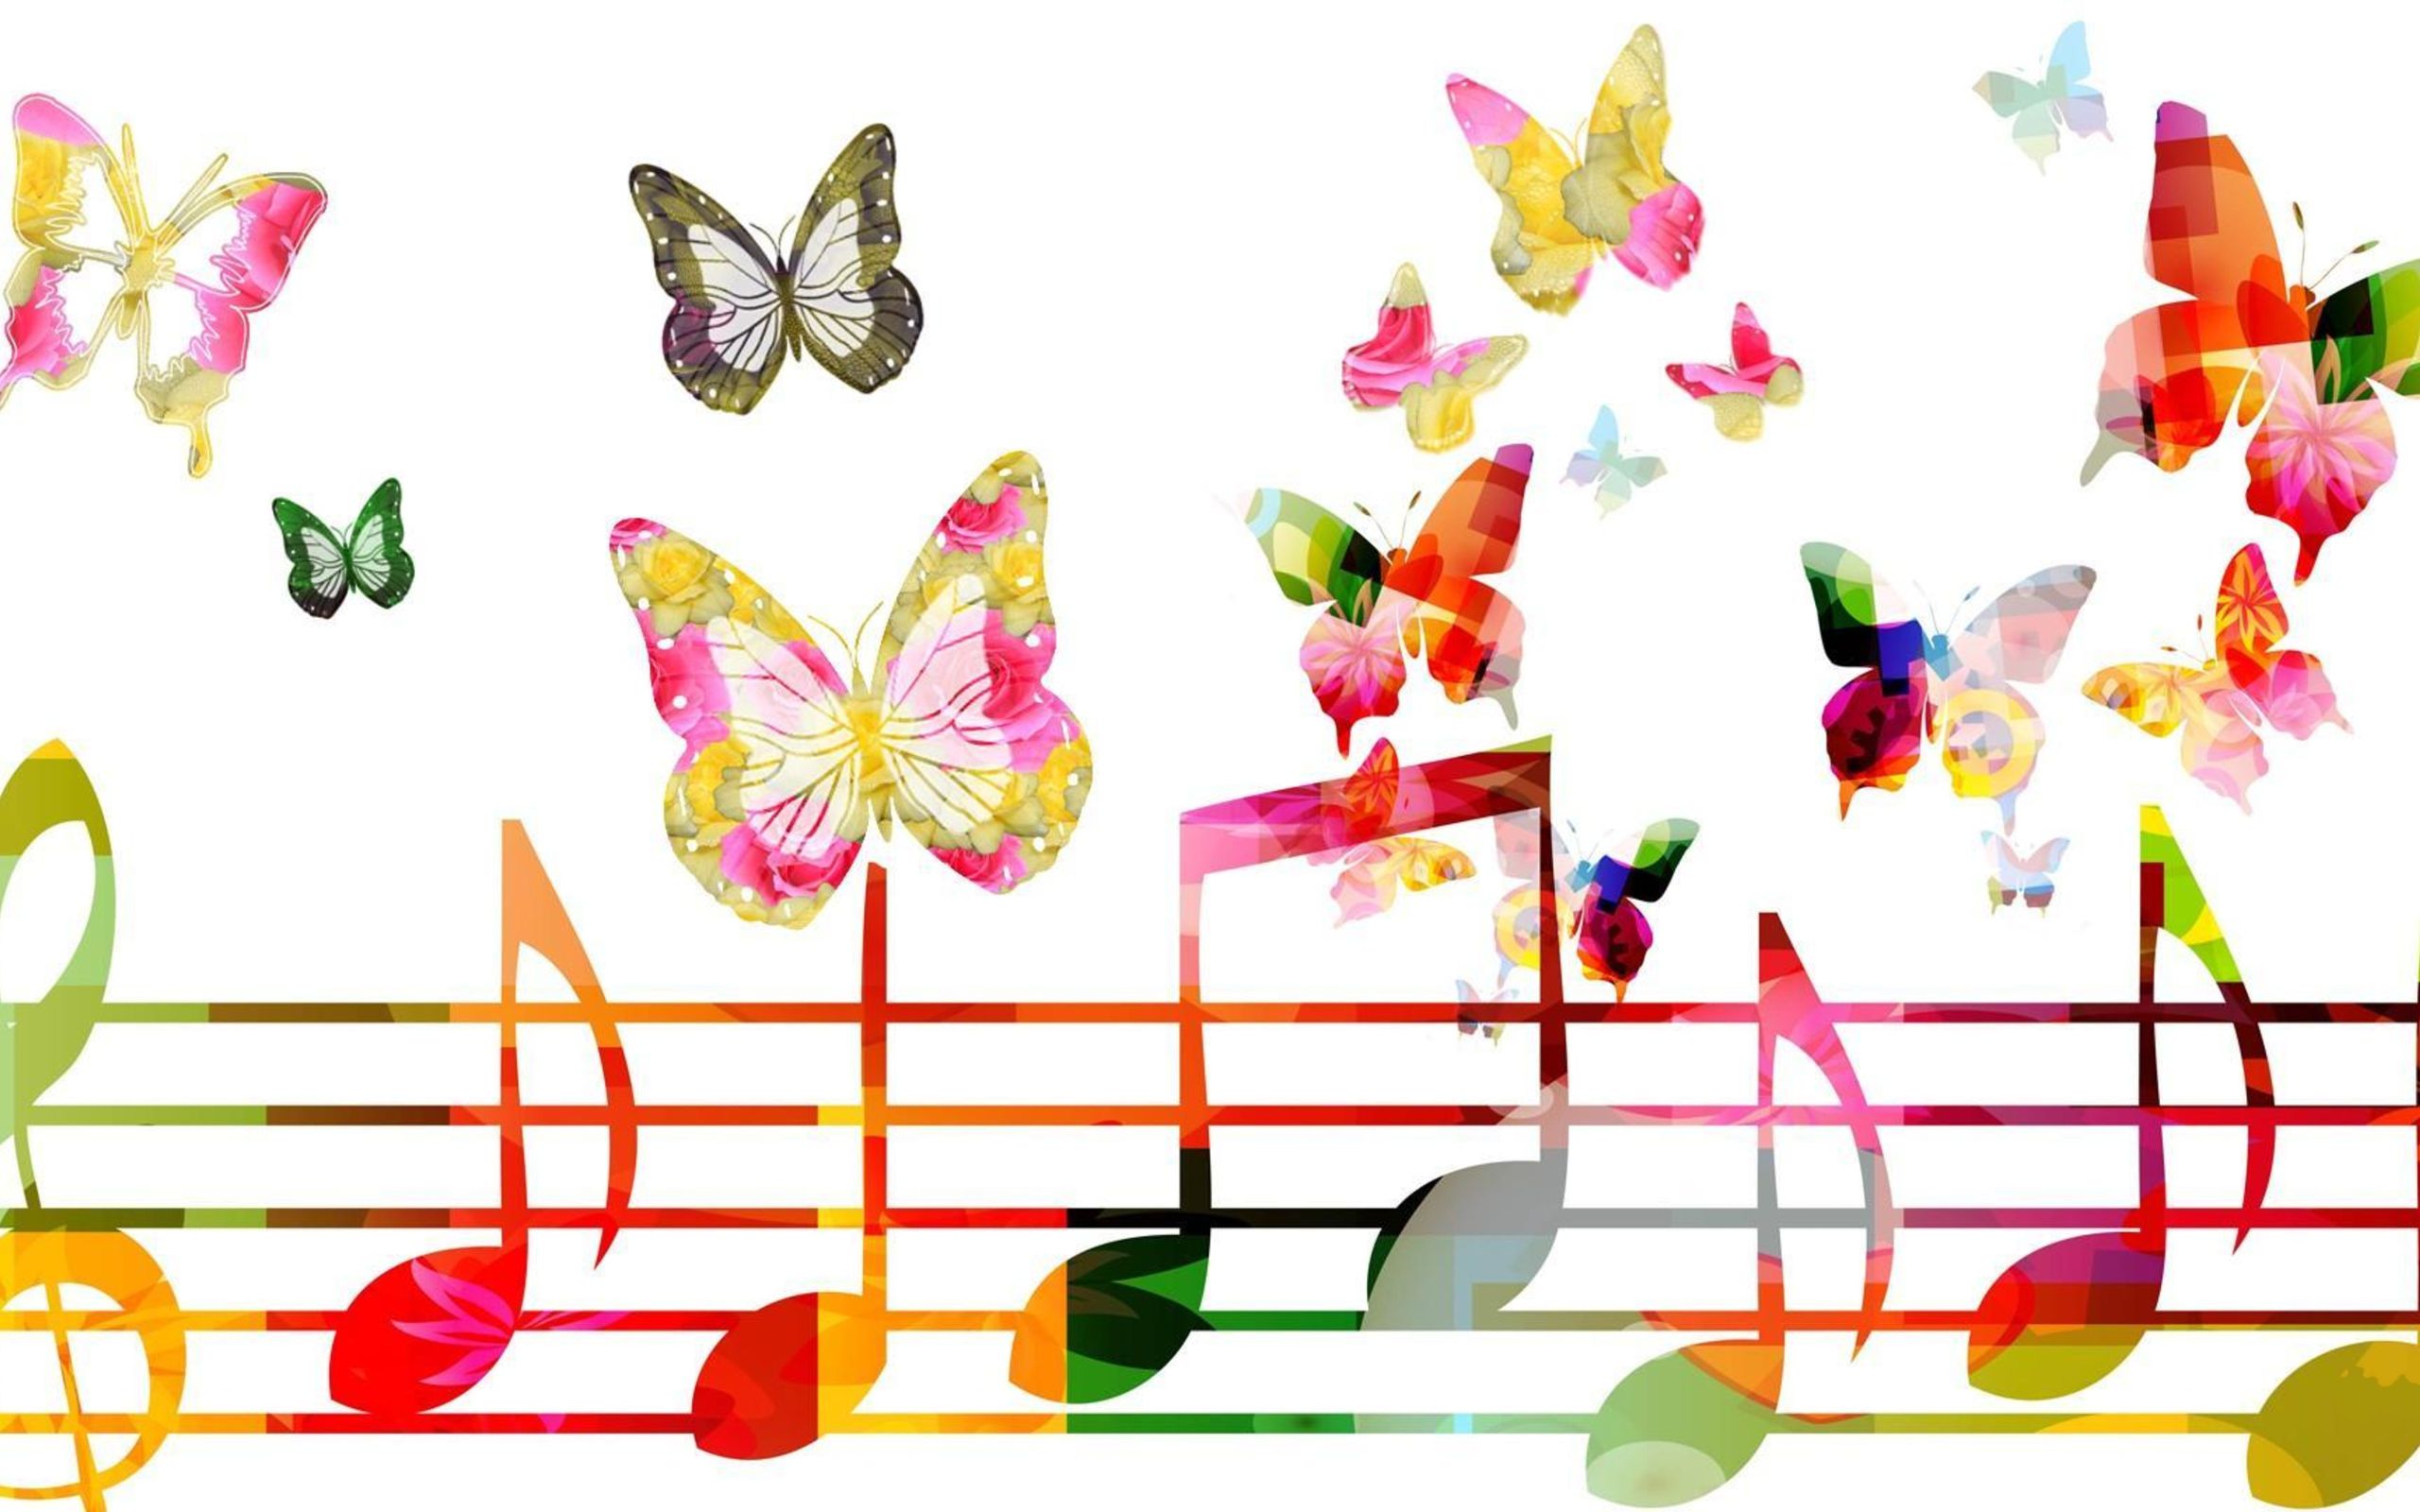 musical note, music, artistic, butterfly, colorful, colors